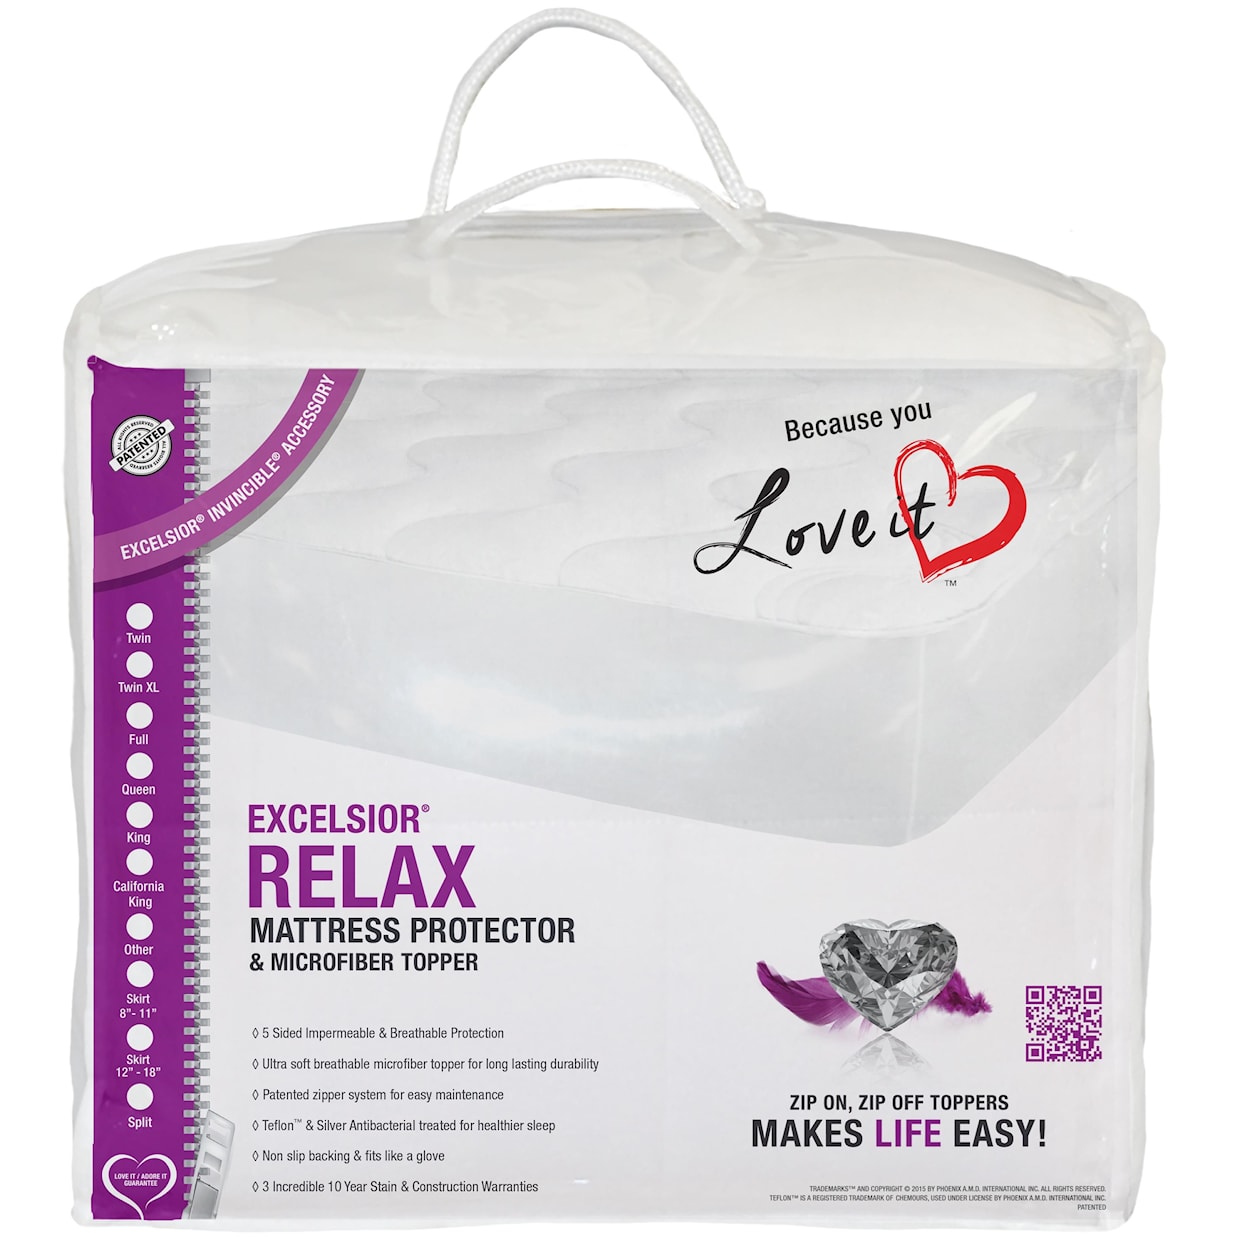 Excelsior Relax 16" Full Mattress Protector